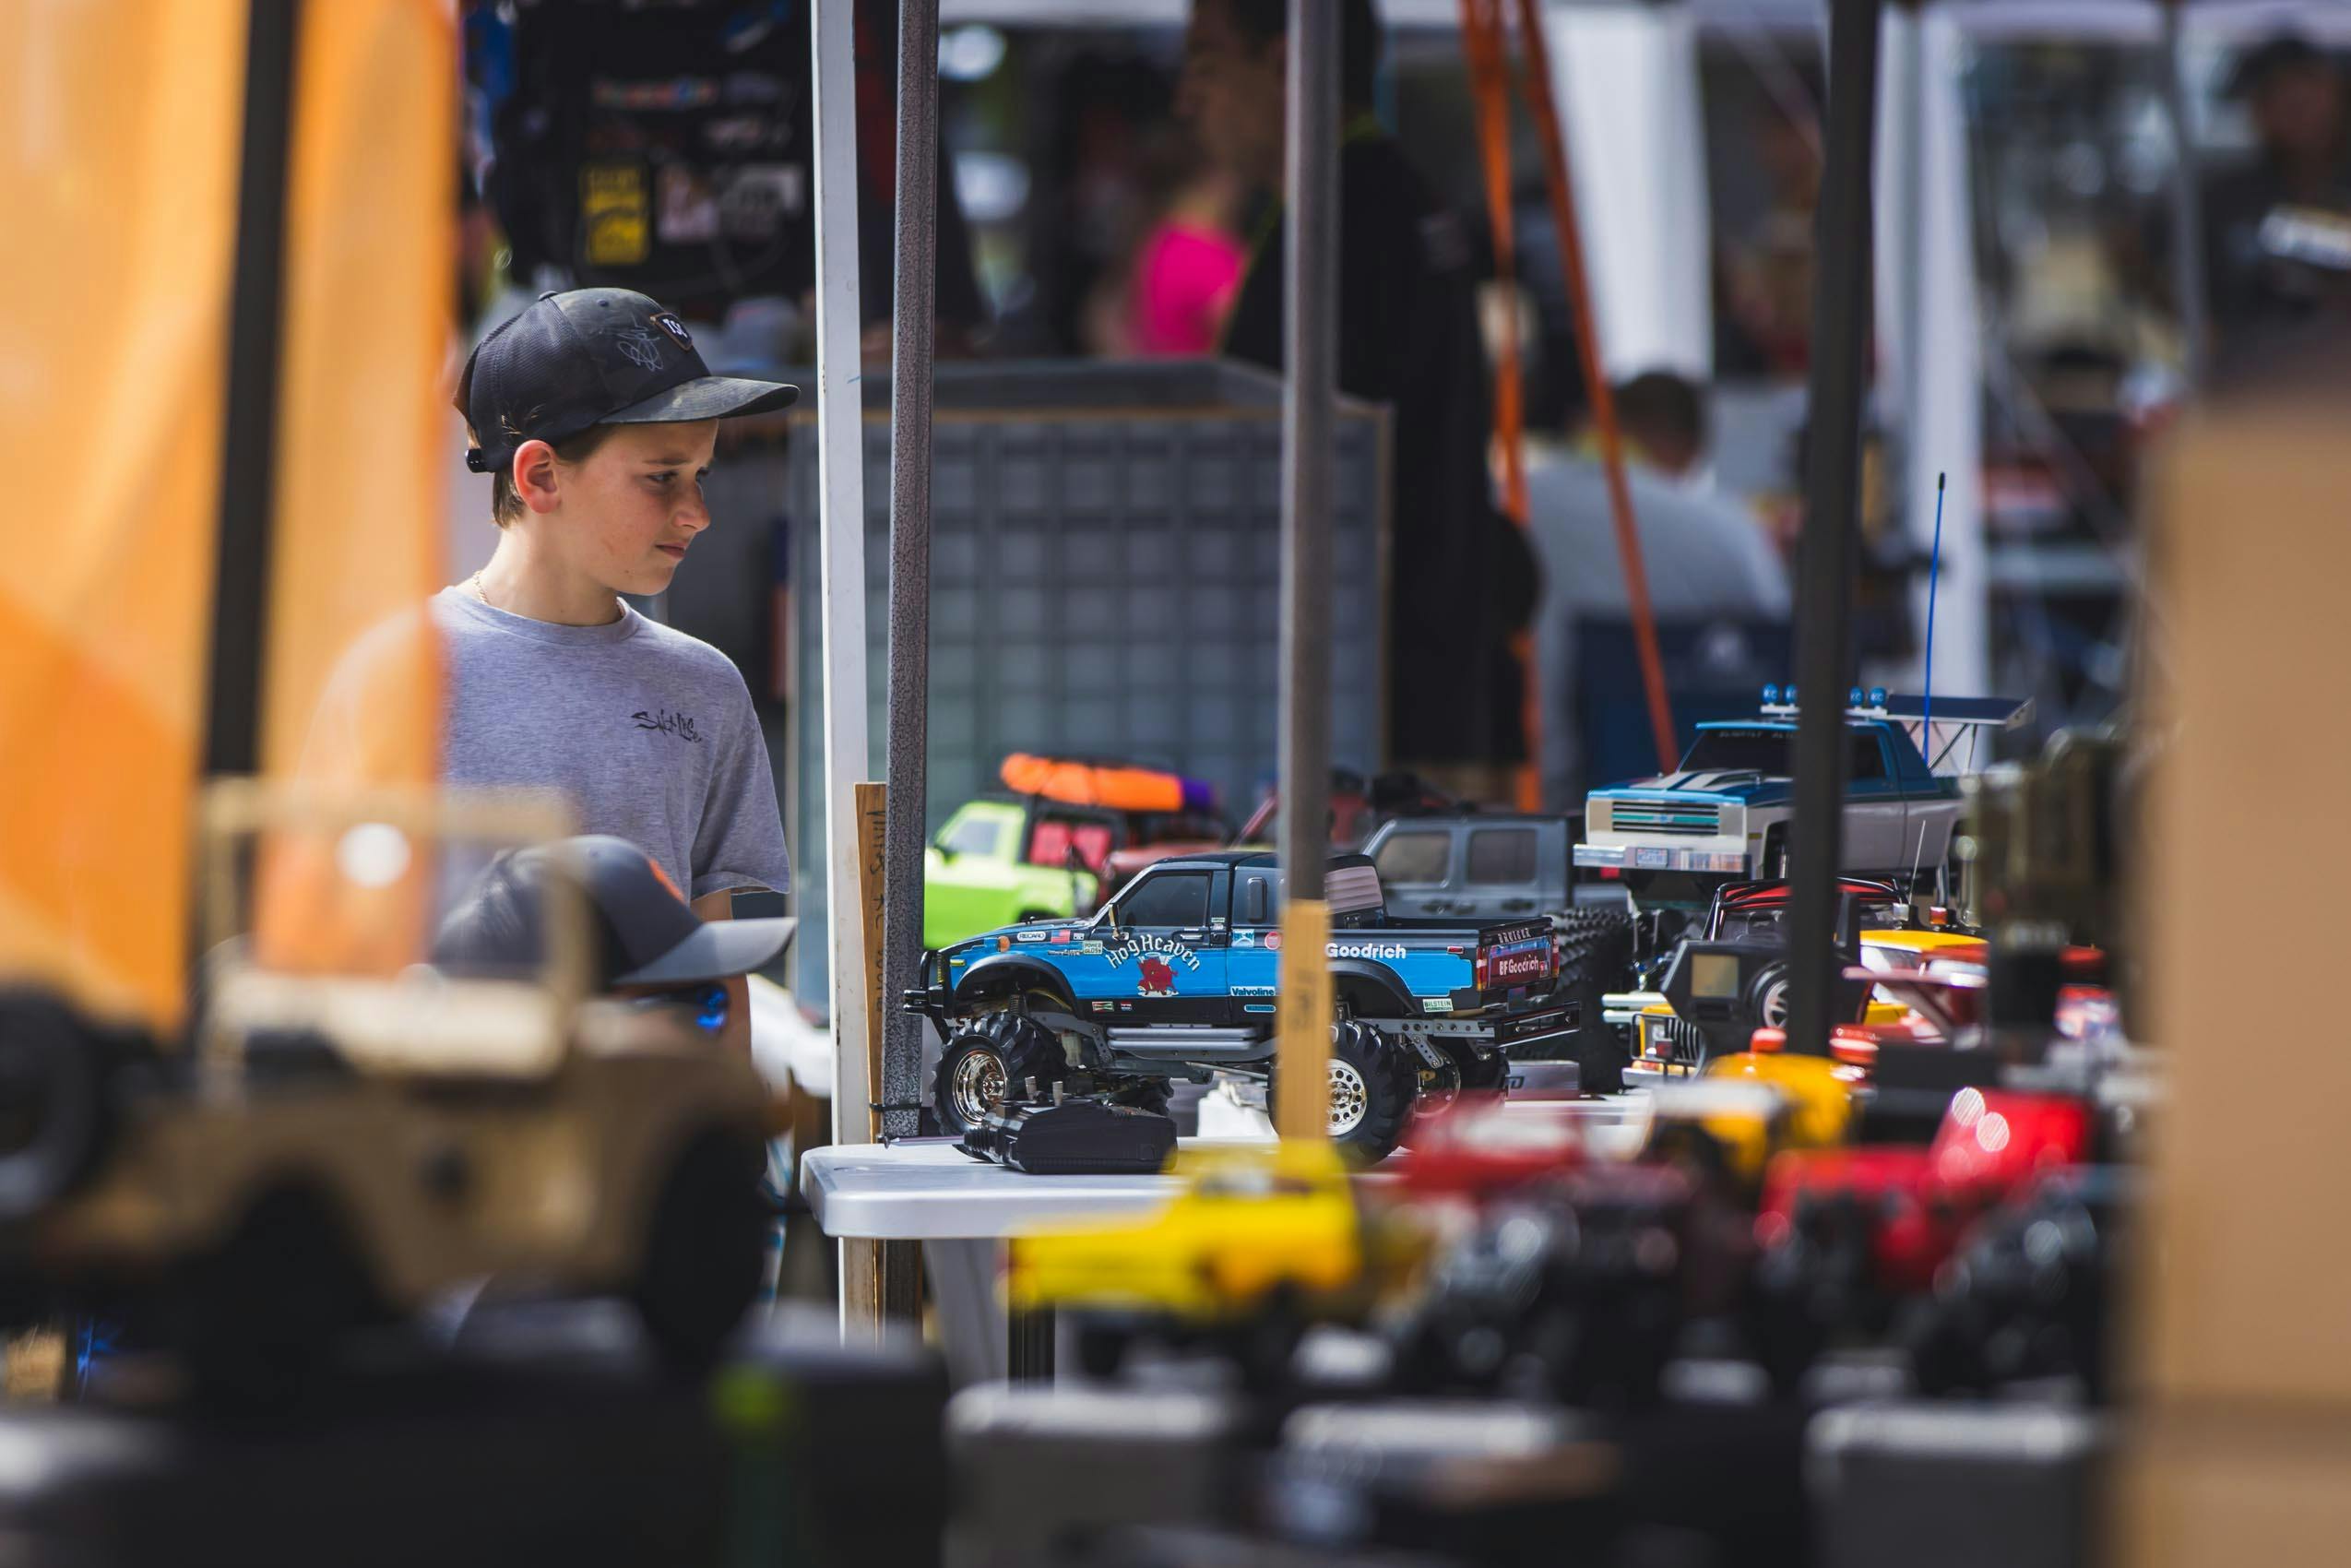 Scale RC Crawlers Kid looking at RCs on table